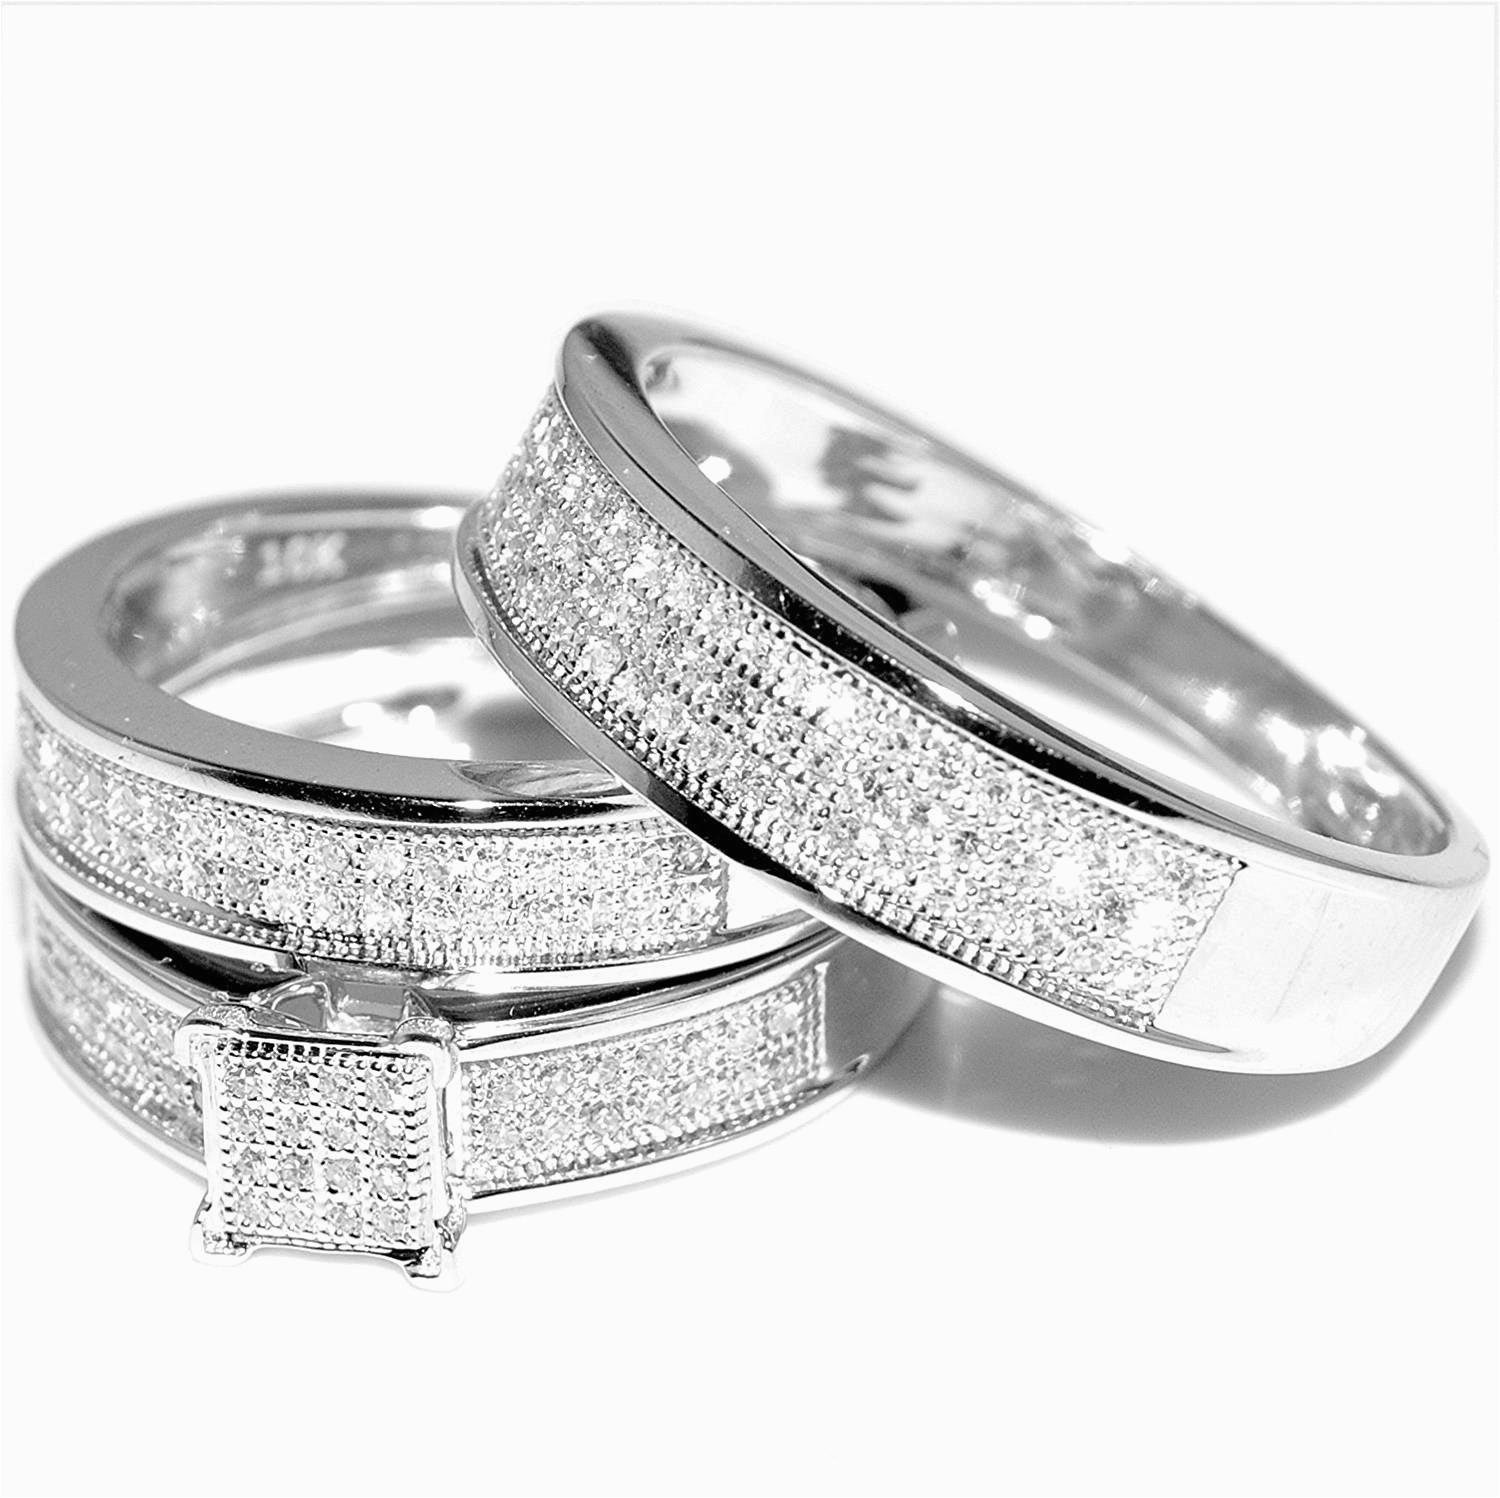 Walmart Wedding Band Sets
 Walmart Wedding Band Sets His and Hers